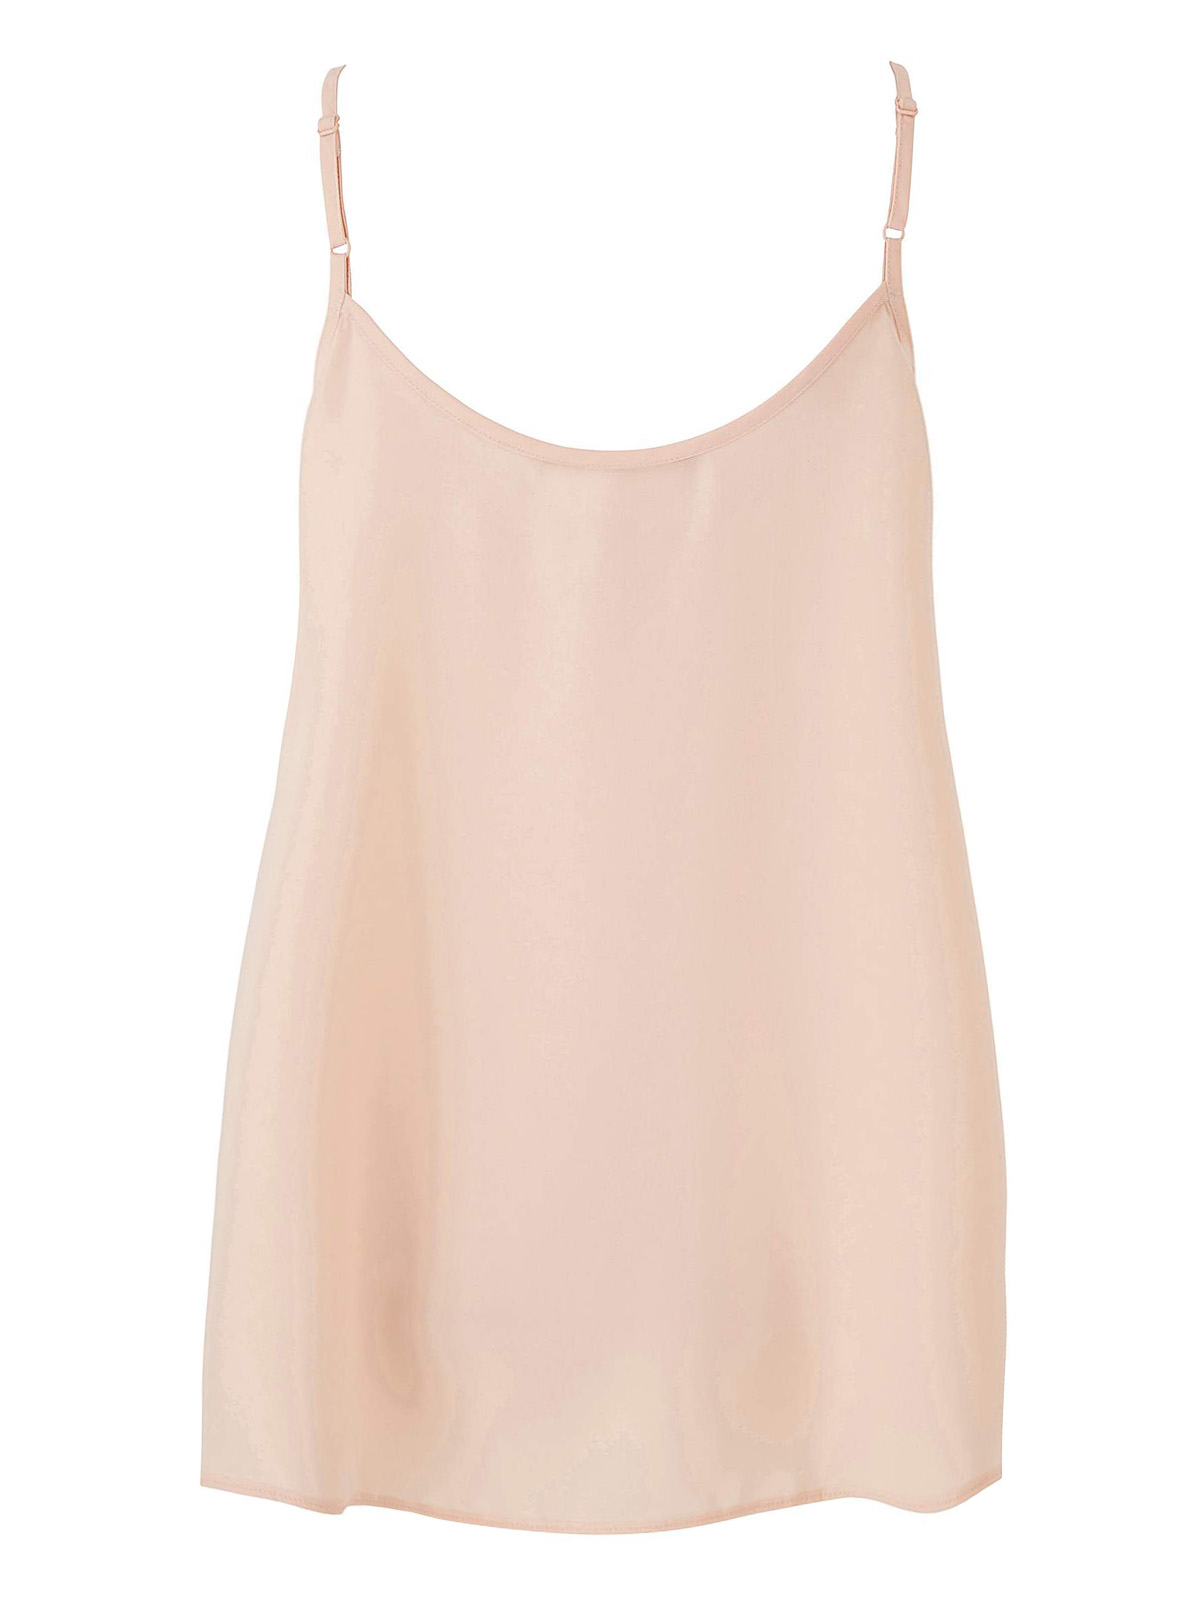 Capsule - - Capsule PEACH Pleat Front Strappy Cami Top - Plus Size 16 to 20